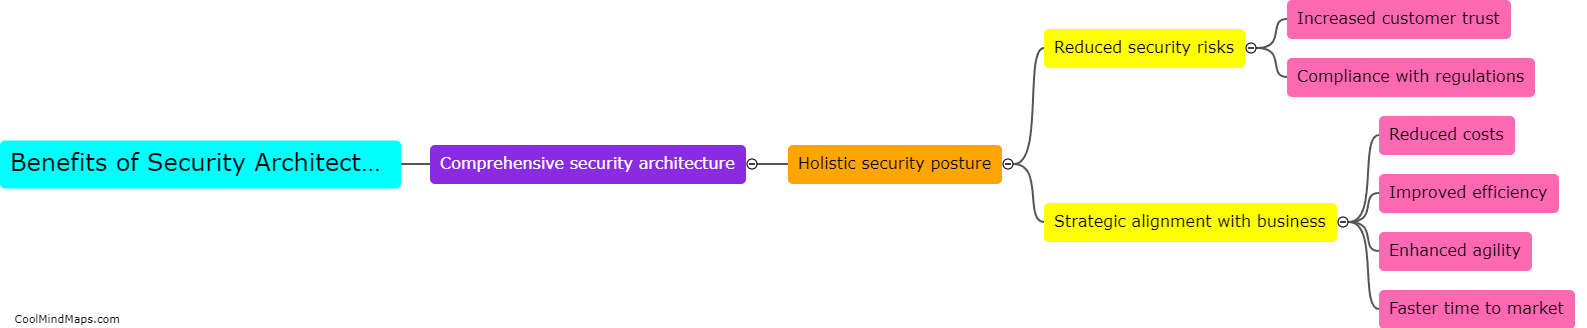 What are the benefits of having a dedicated Security Architecture team?